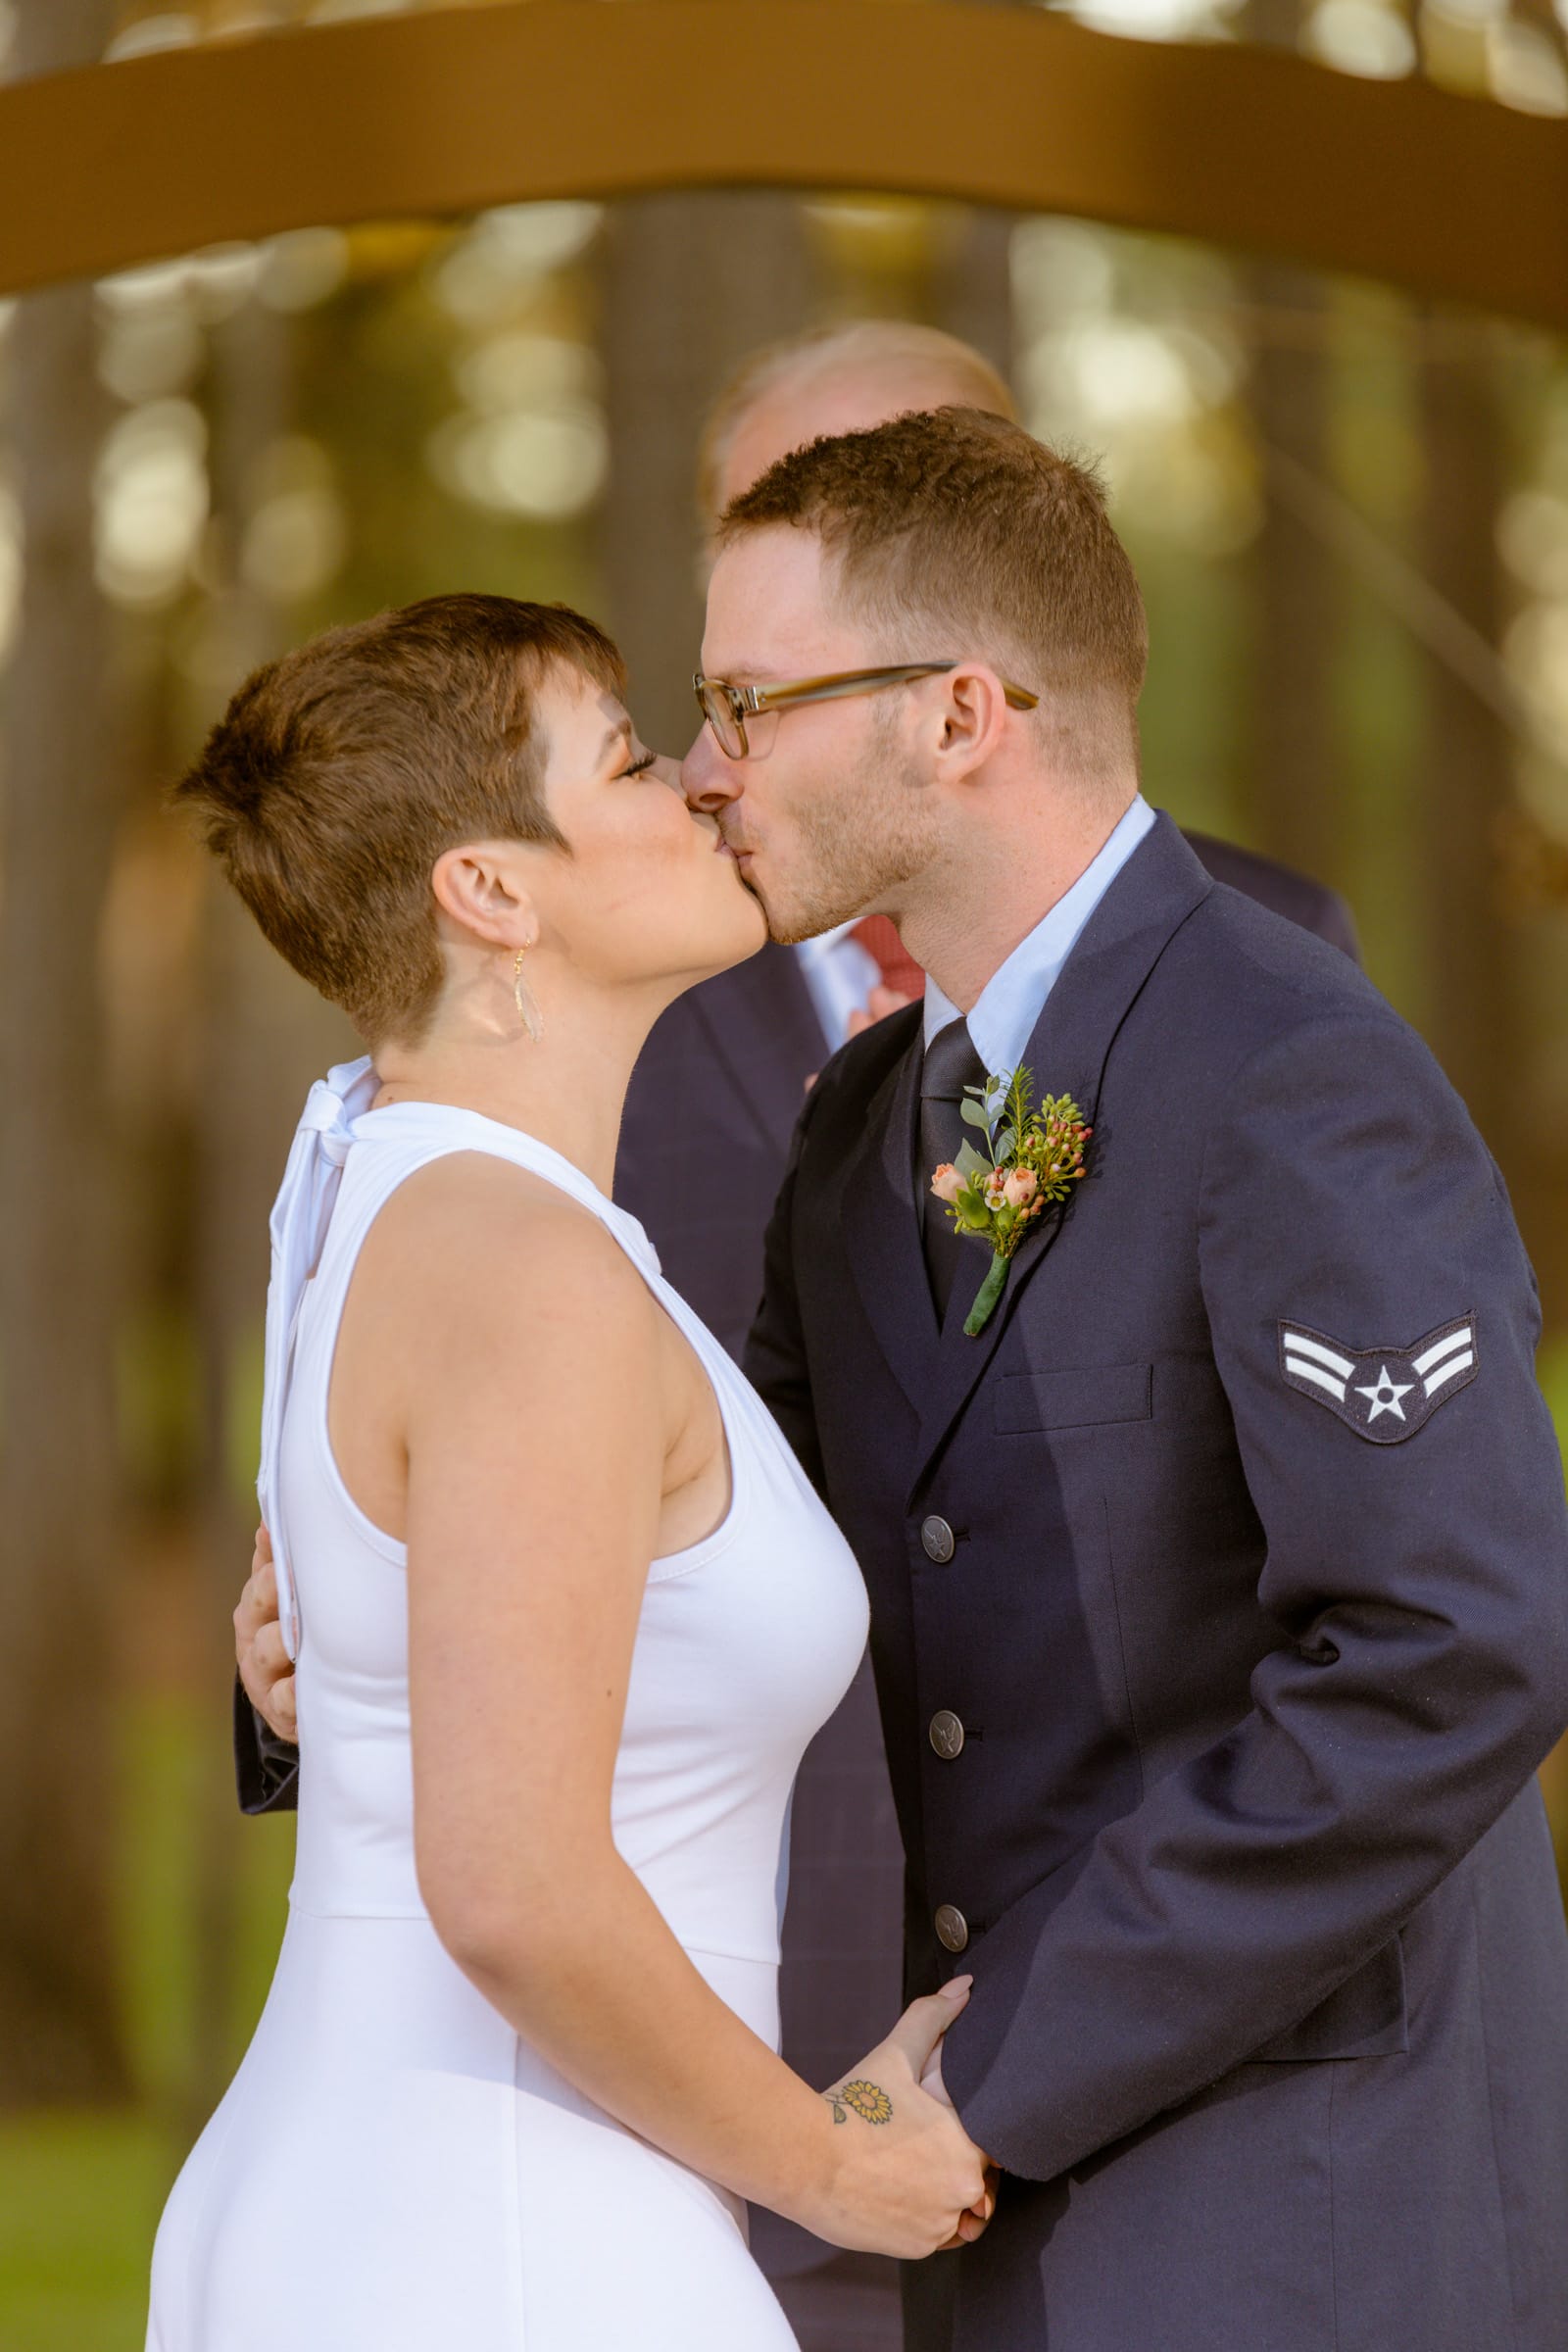  The image captures an intimate moment between a couple on their wedding day, taken by a skilled Houston wedding photographer. The setting appears to be outdoors with soft natural lighting, possibly in a park or garden, suggesting the photographer's ability to utilize Houston's diverse landscapes.  The focal point is the couple engaged in a gentle kiss. On the left is a person in a sleeveless white wedding dress with a modern cut, featuring a clean, form-fitting silhouette that flatters their figure. Their hair is styled in a short, chic cut, and they wear subtle, elegant earrings. Their eyes are closed, savoring the moment of the kiss.  On the right is a person in a dark military uniform, indicative of Air Force service, denoted by the chevron rank insignia on their sleeve. They also wear glasses and have a short haircut, with a focused expression and eyes closed during the kiss. A boutonnière with a mix of small flowers adds a touch of color to the dark uniform.  The couple is standing closely, with the person in the dress holding the uniformed partner's hand, which gently rests on their waist. The background is a soft bokeh of greens and browns, typical of a lush, outdoor setting, creating a dreamy and romantic atmosphere.  This image exudes a sense of timeless elegance and heartfelt emotion, showcasing the photographer's talent for capturing profound and tender moments that embody the spirit of a wedding day in Houston